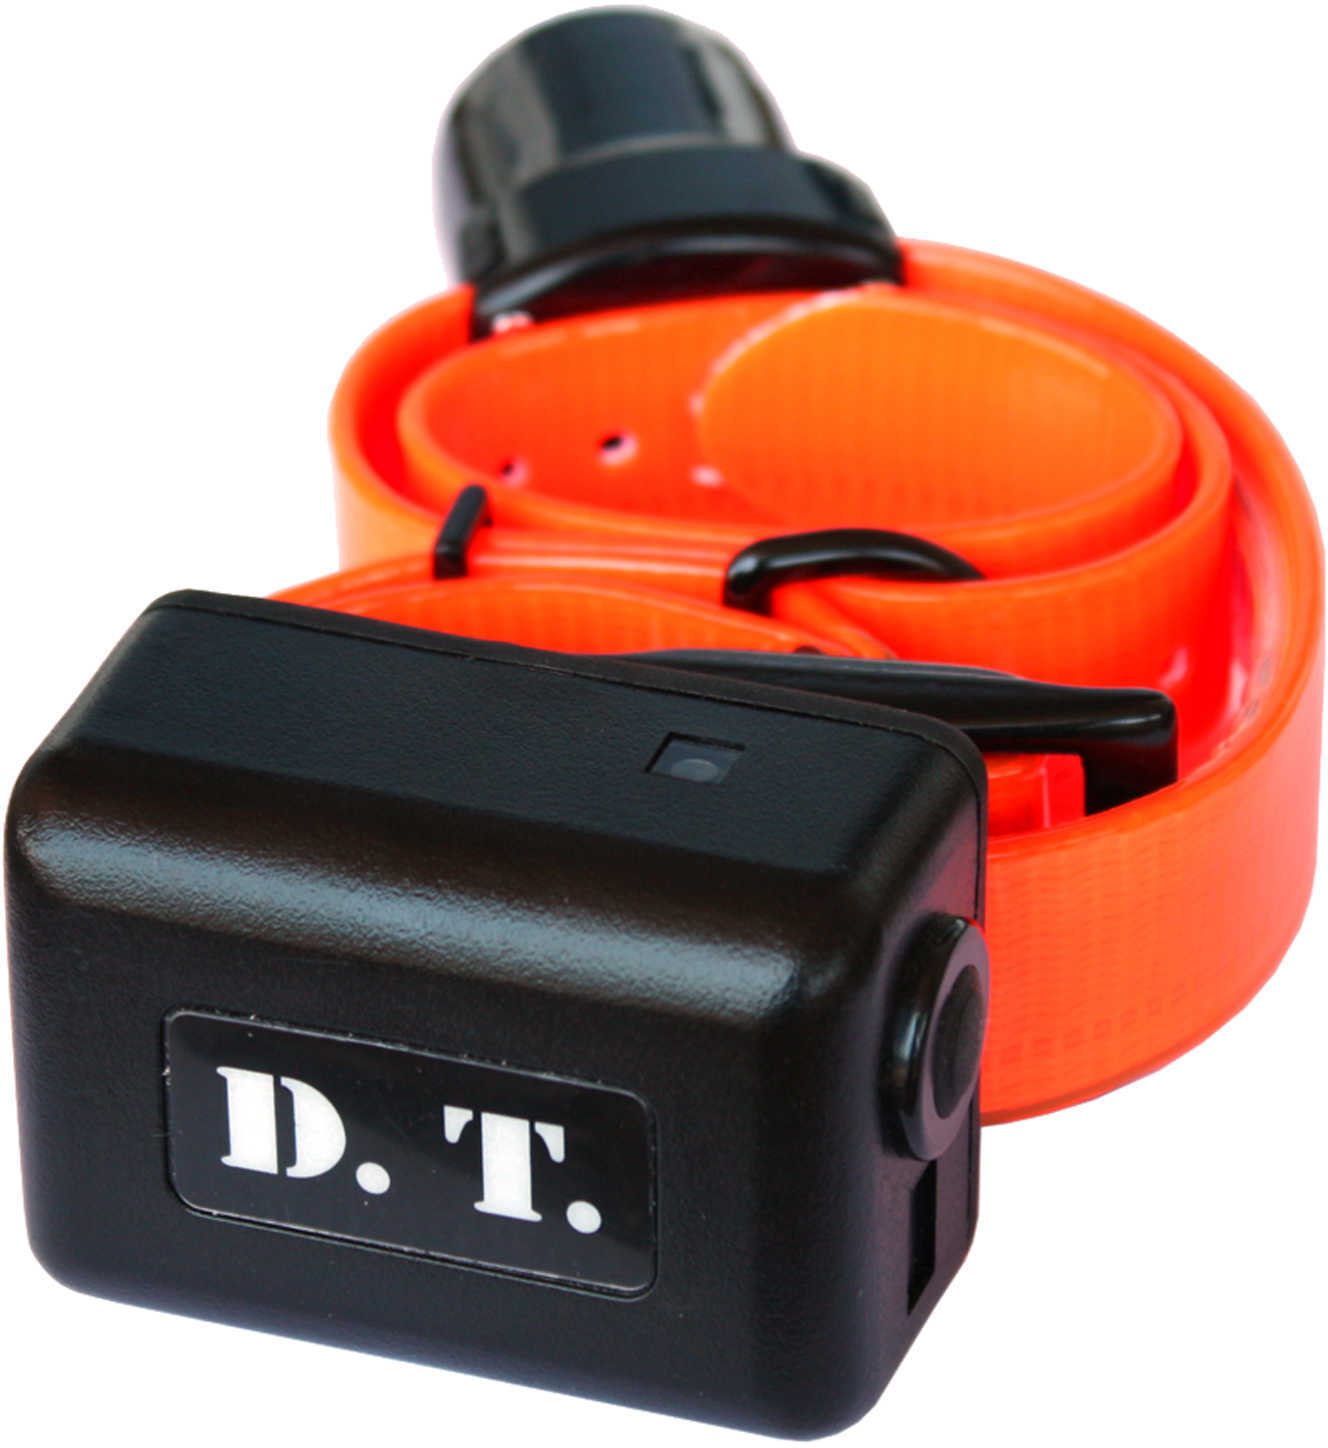 DT Systems H20 1850 Plus Collar Only Orange ADDON-O